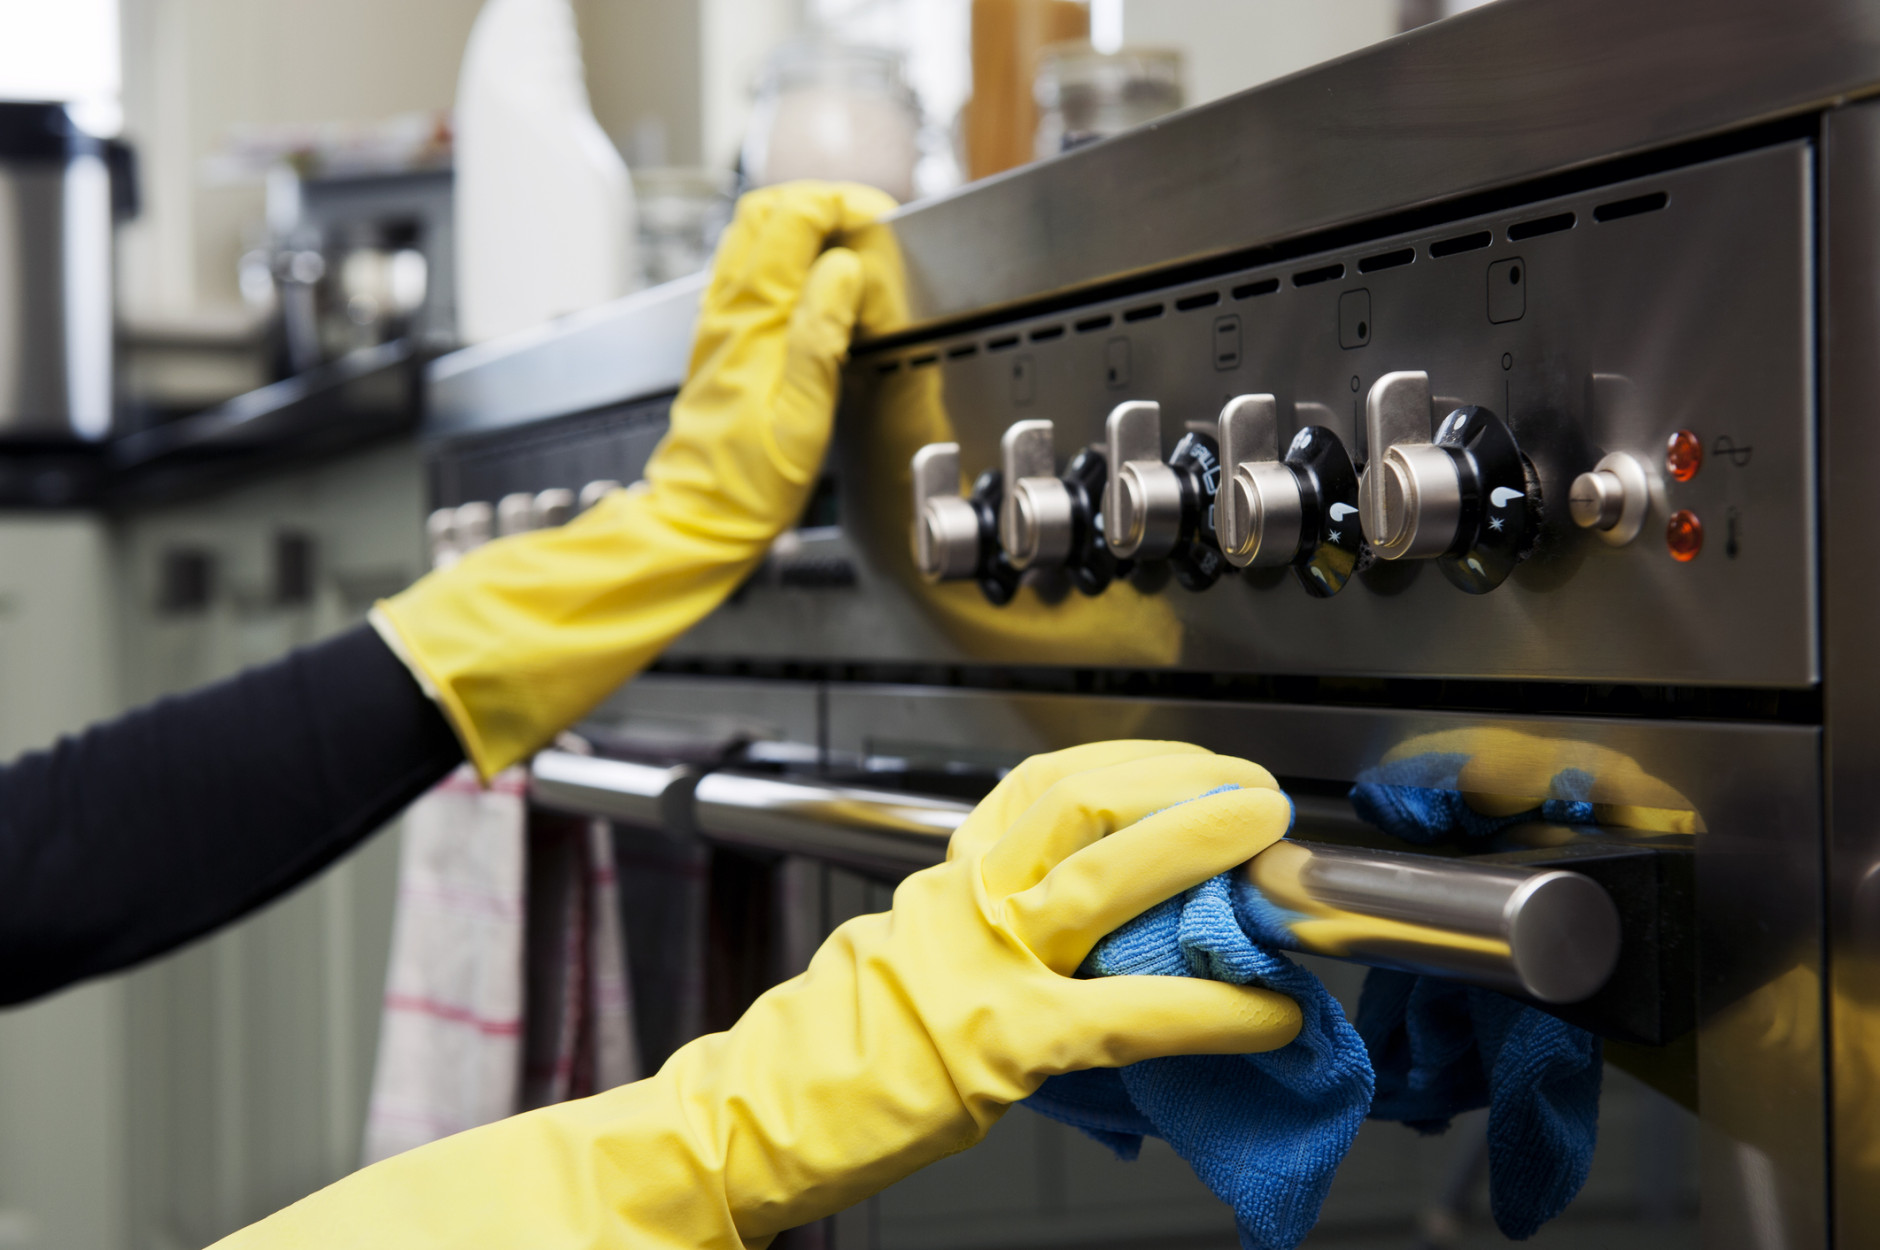 Closeup photograph of two hands cleaning the oven in a domestic kitchen.